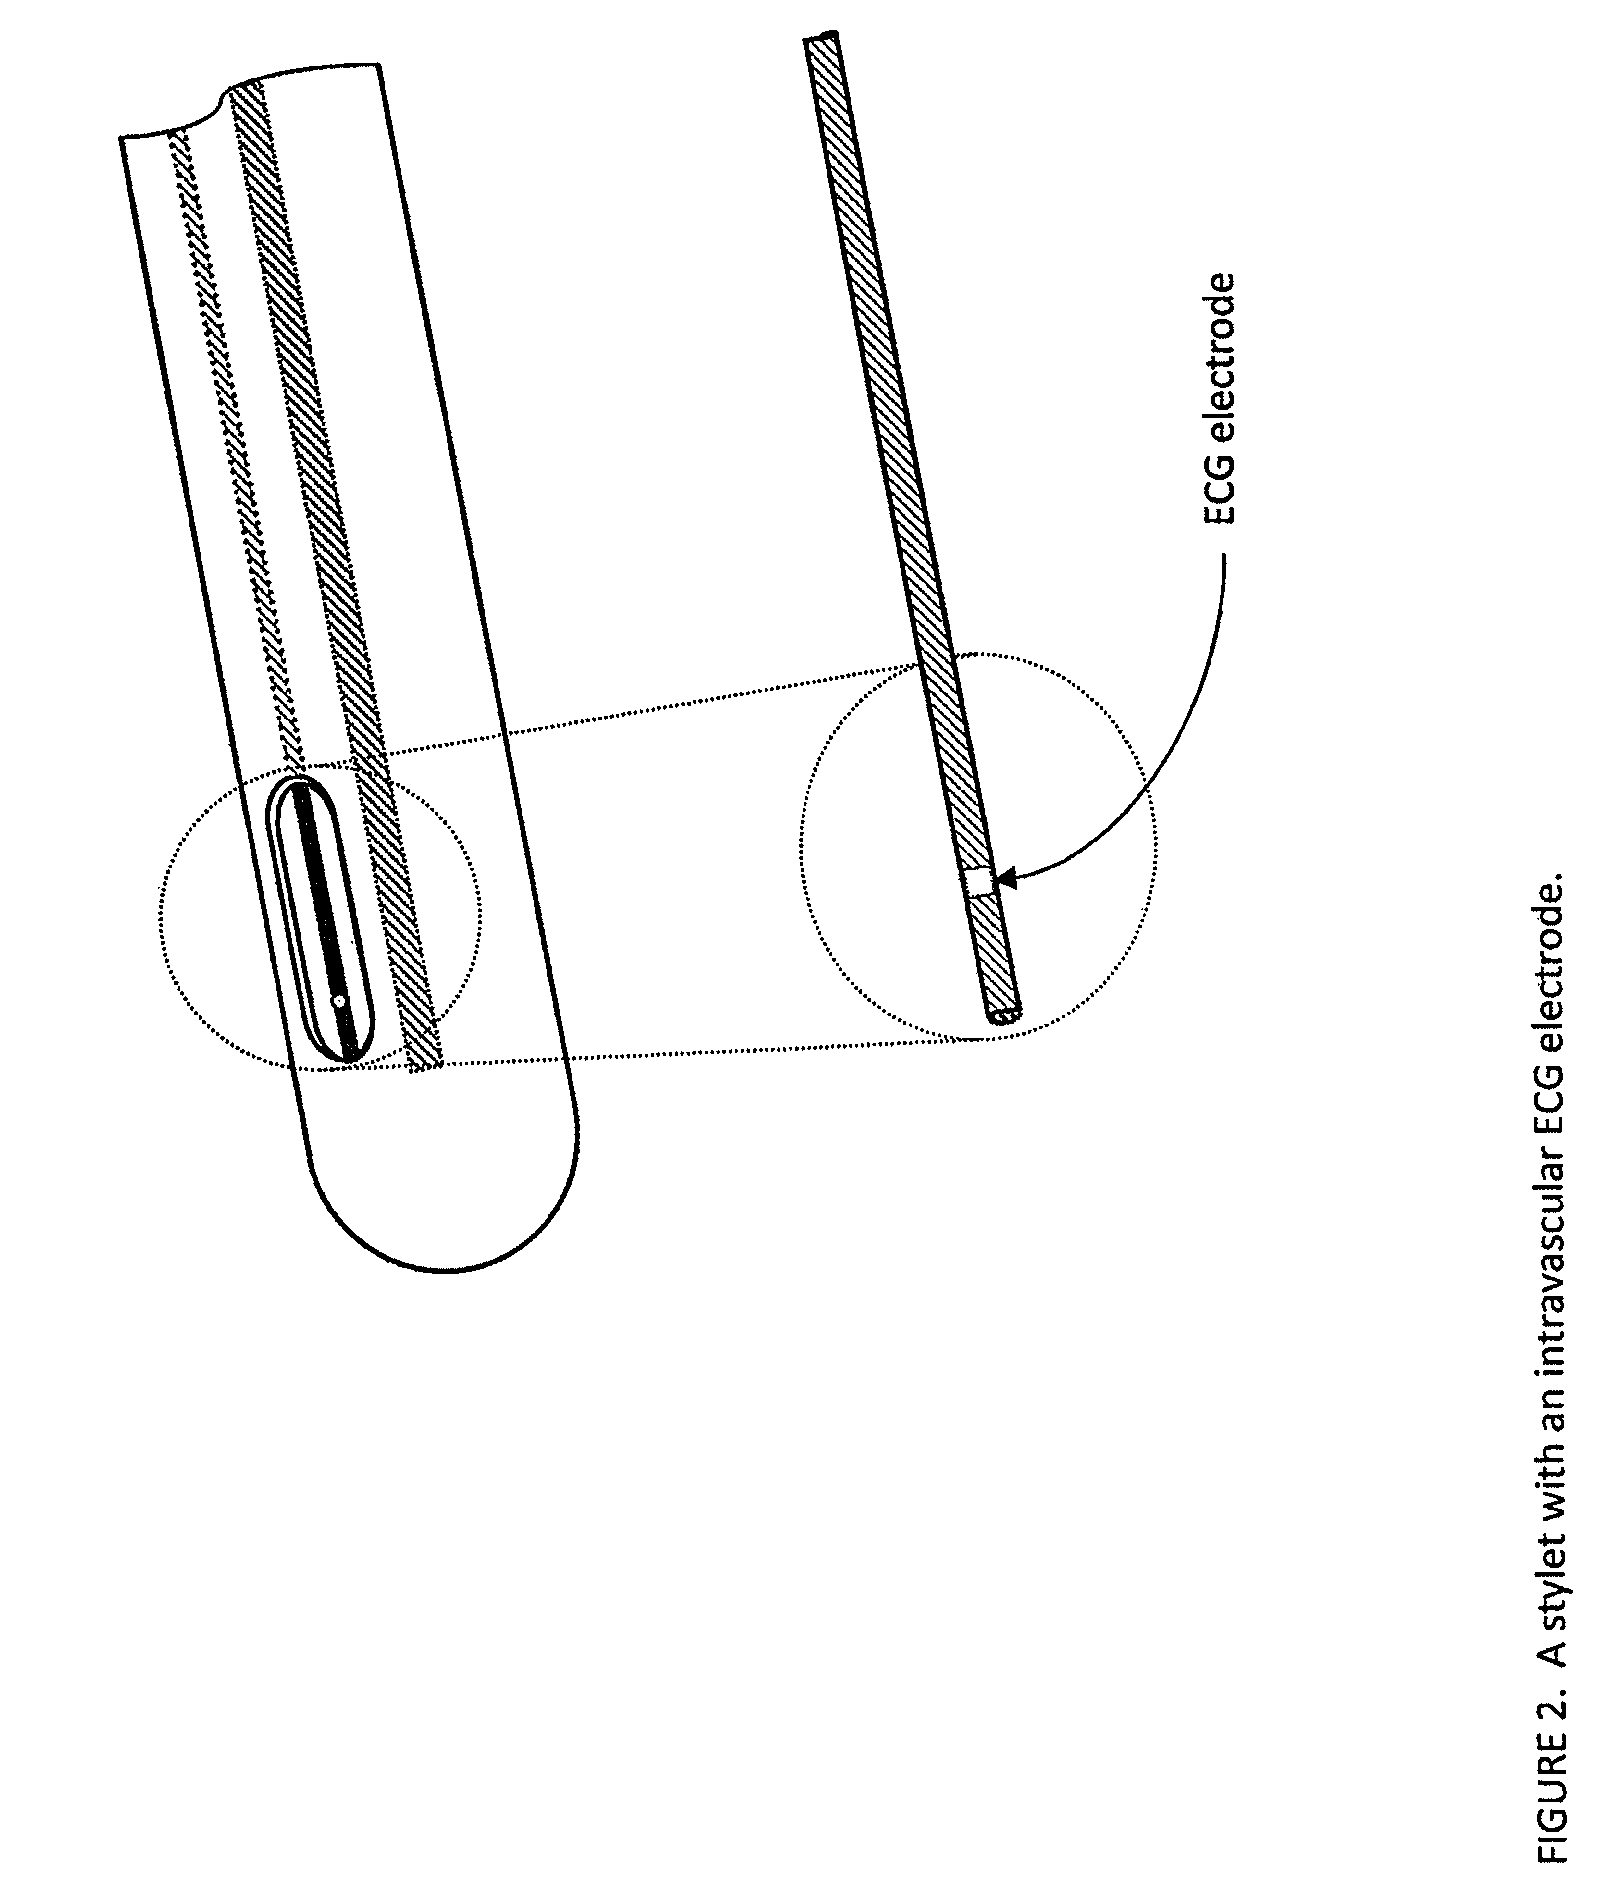 Systems and methods for detection of the superior vena cava area